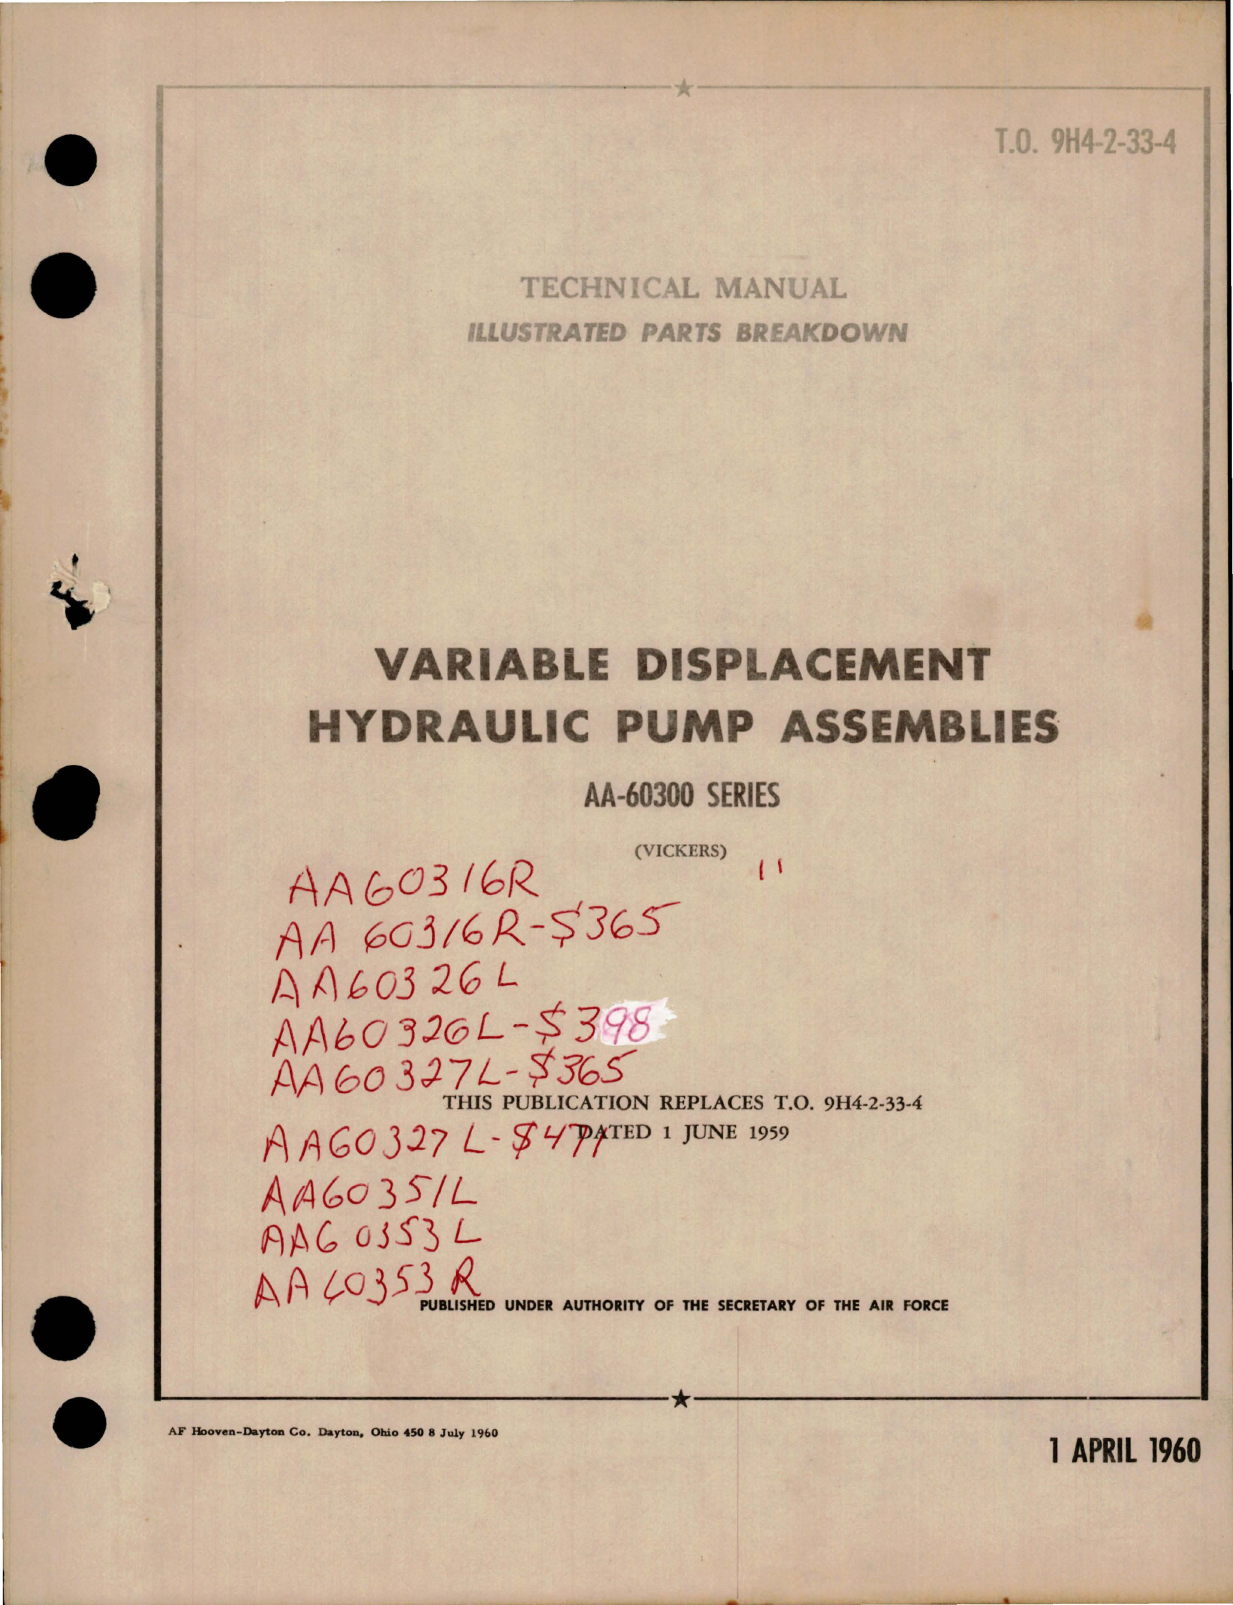 Sample page 1 from AirCorps Library document: Illustrated Parts Breakdown for Variable Displacement Hydraulic Pump Assemblies - AA-60300 Series 